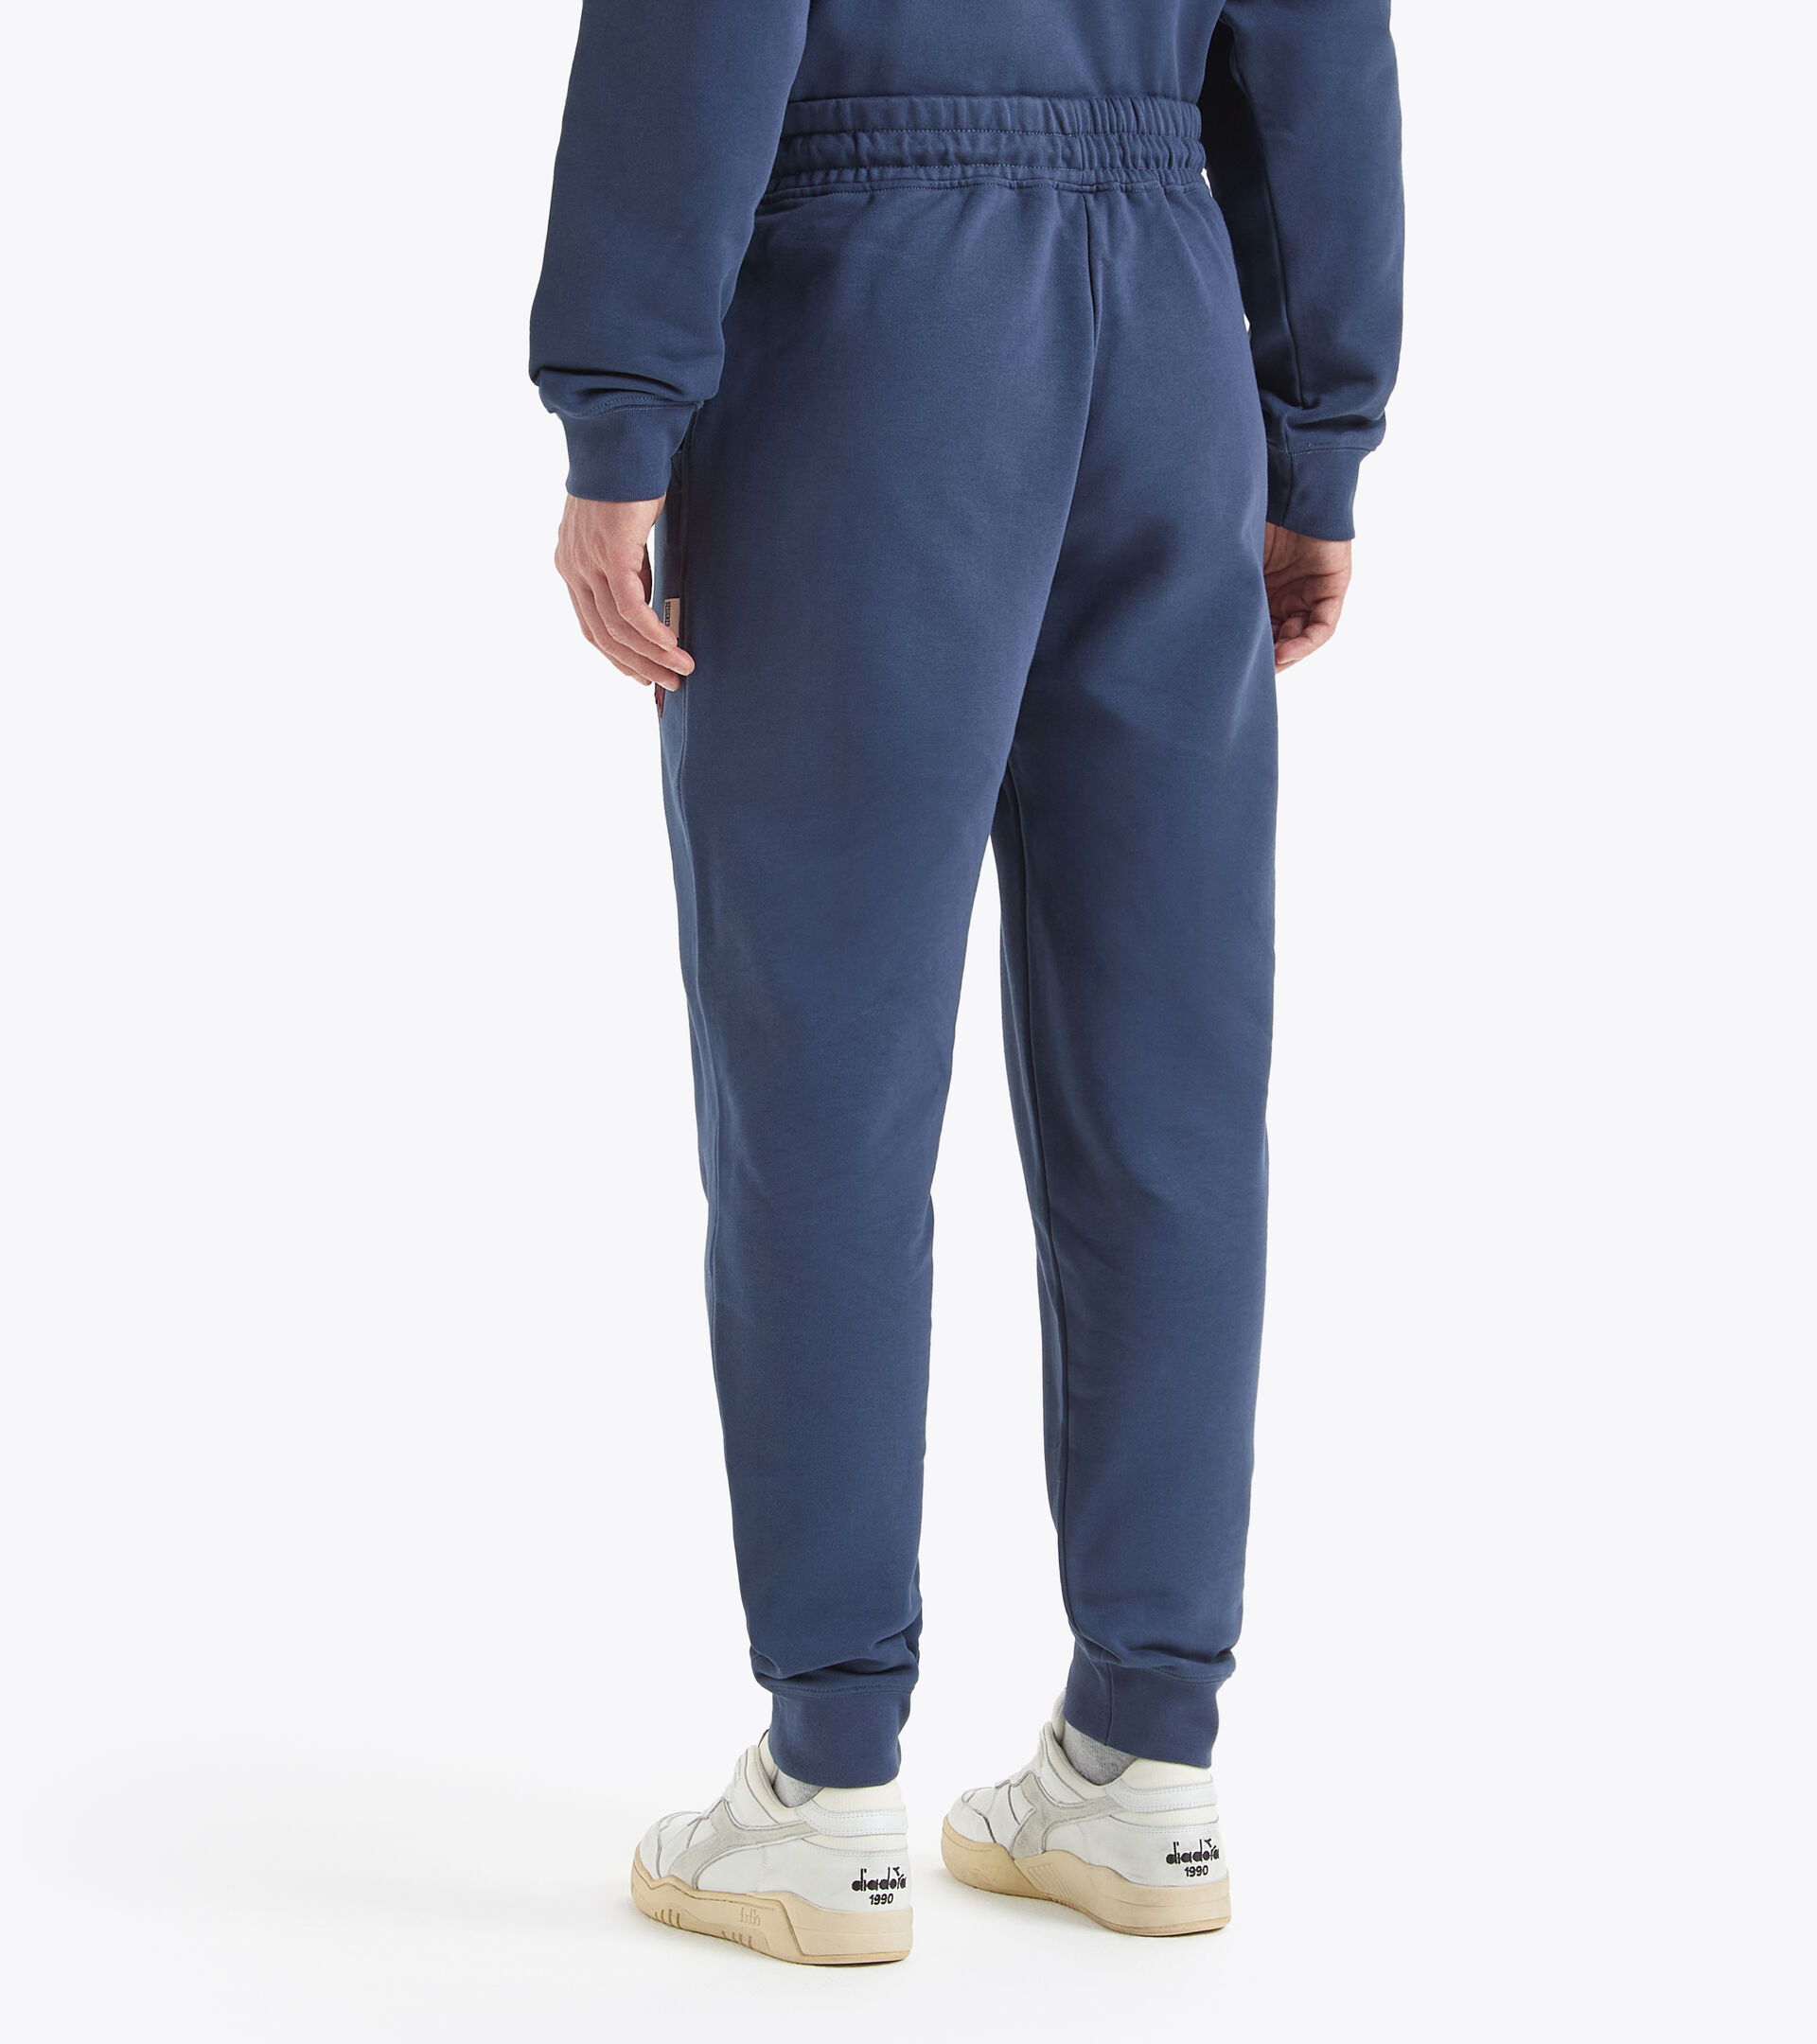 Jogger pants with recycled cotton - Made in italy - Gender Neutral JOGGER PANT LEGACY OCEANA - Diadora